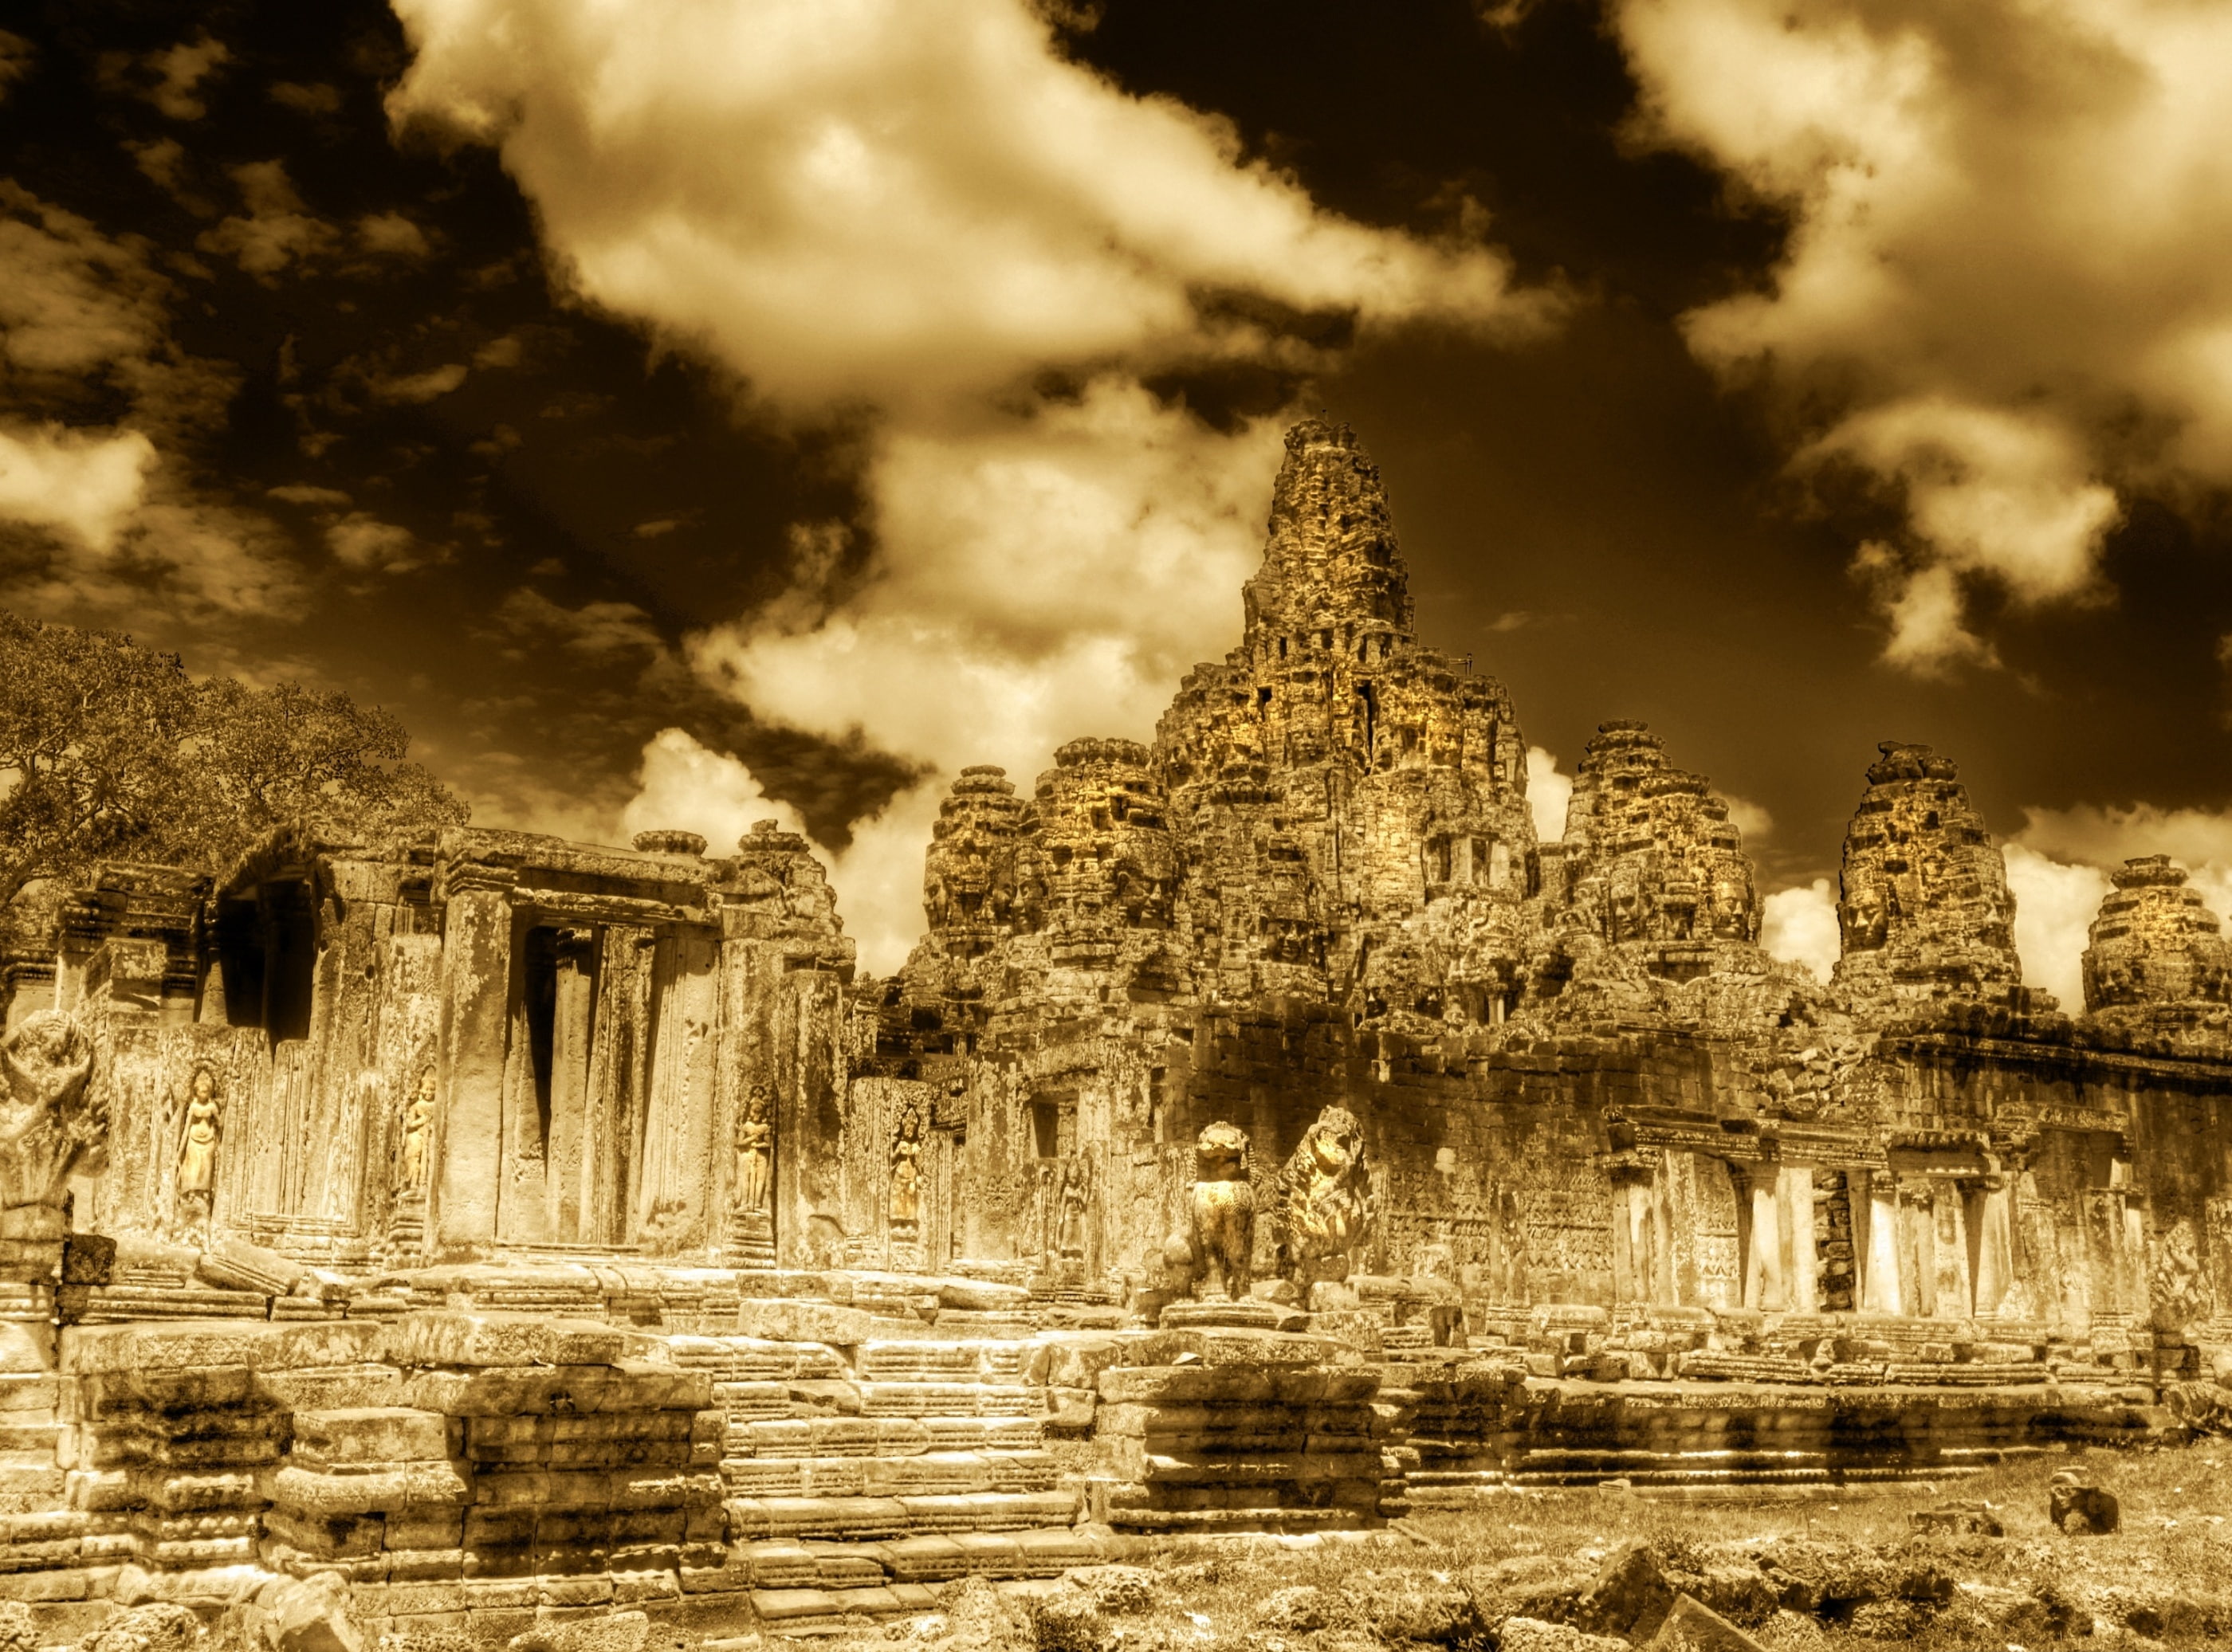 The Towers Of Angkor Thom, Cambodia, concrete structures, Vintage